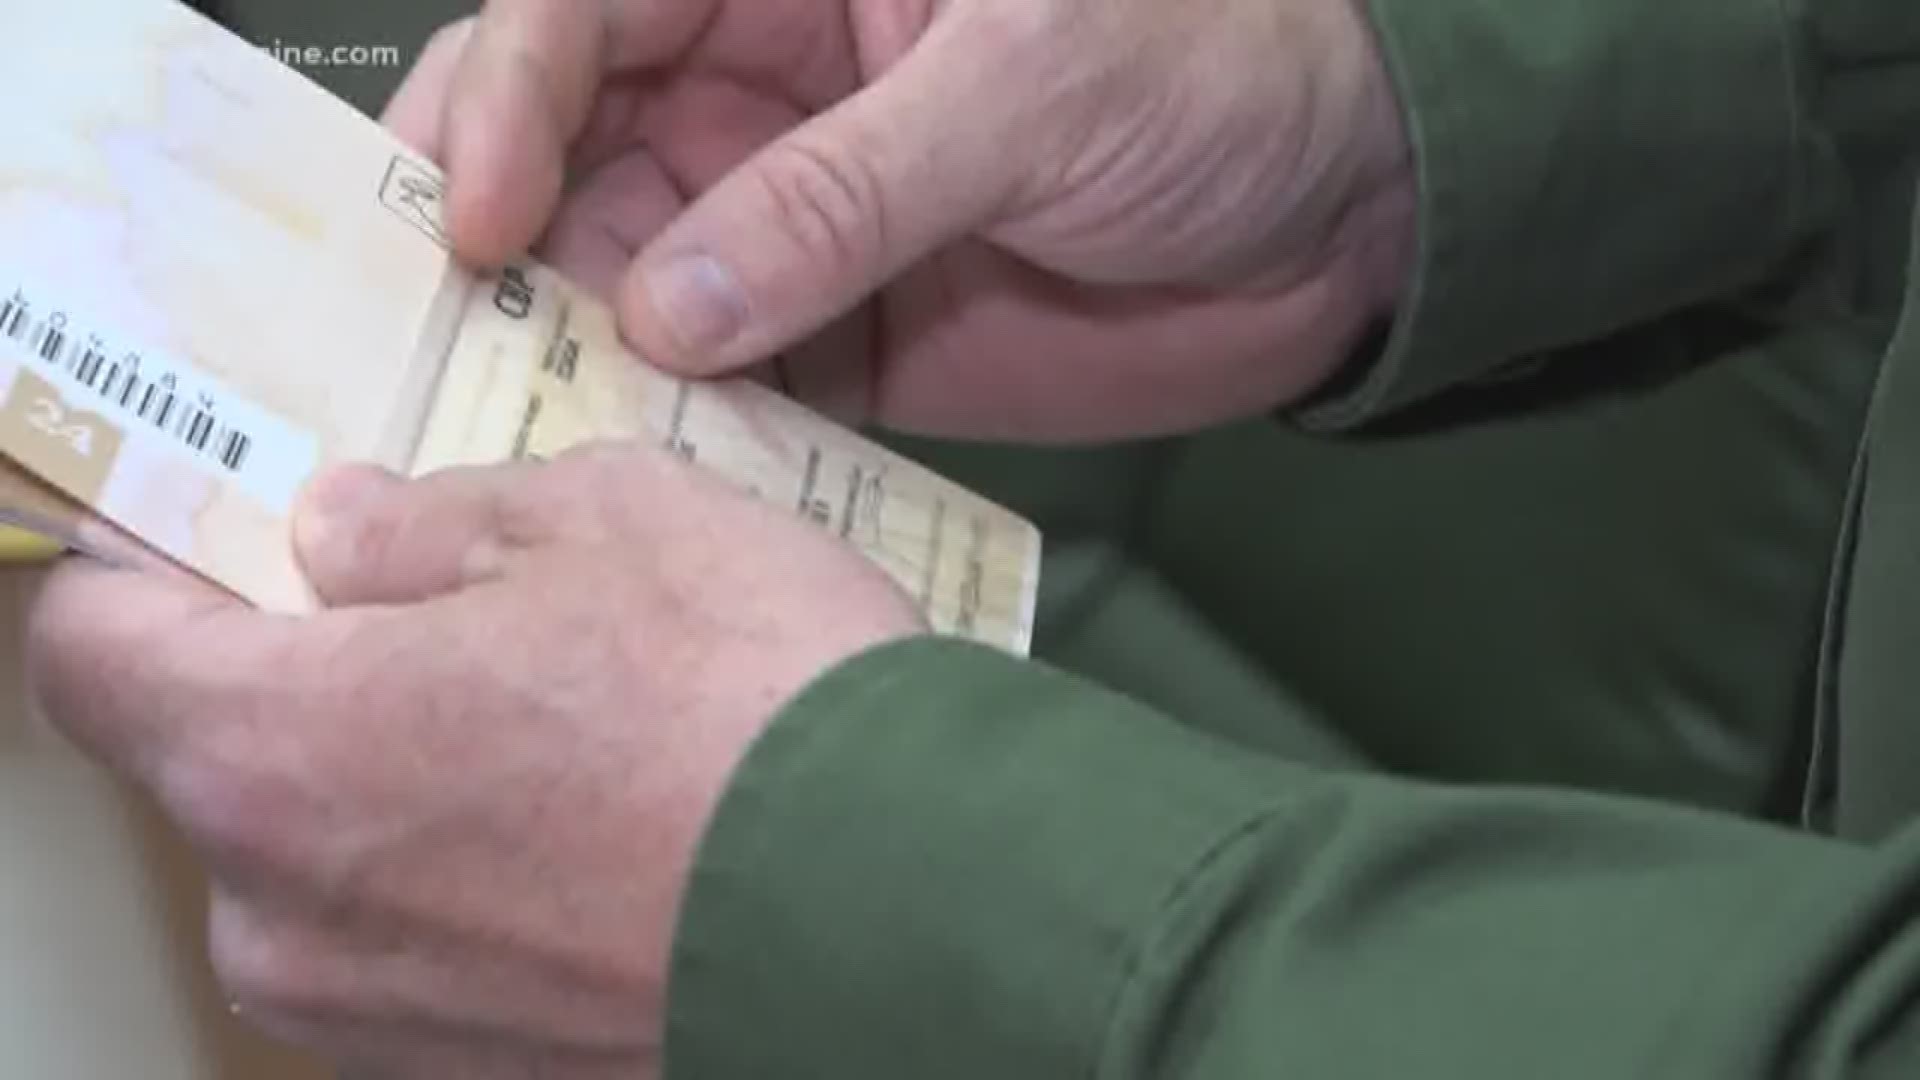 The U.S. Border Patrol explains to NEWS CENTER Maine how they work to detect fake IDs at the border.